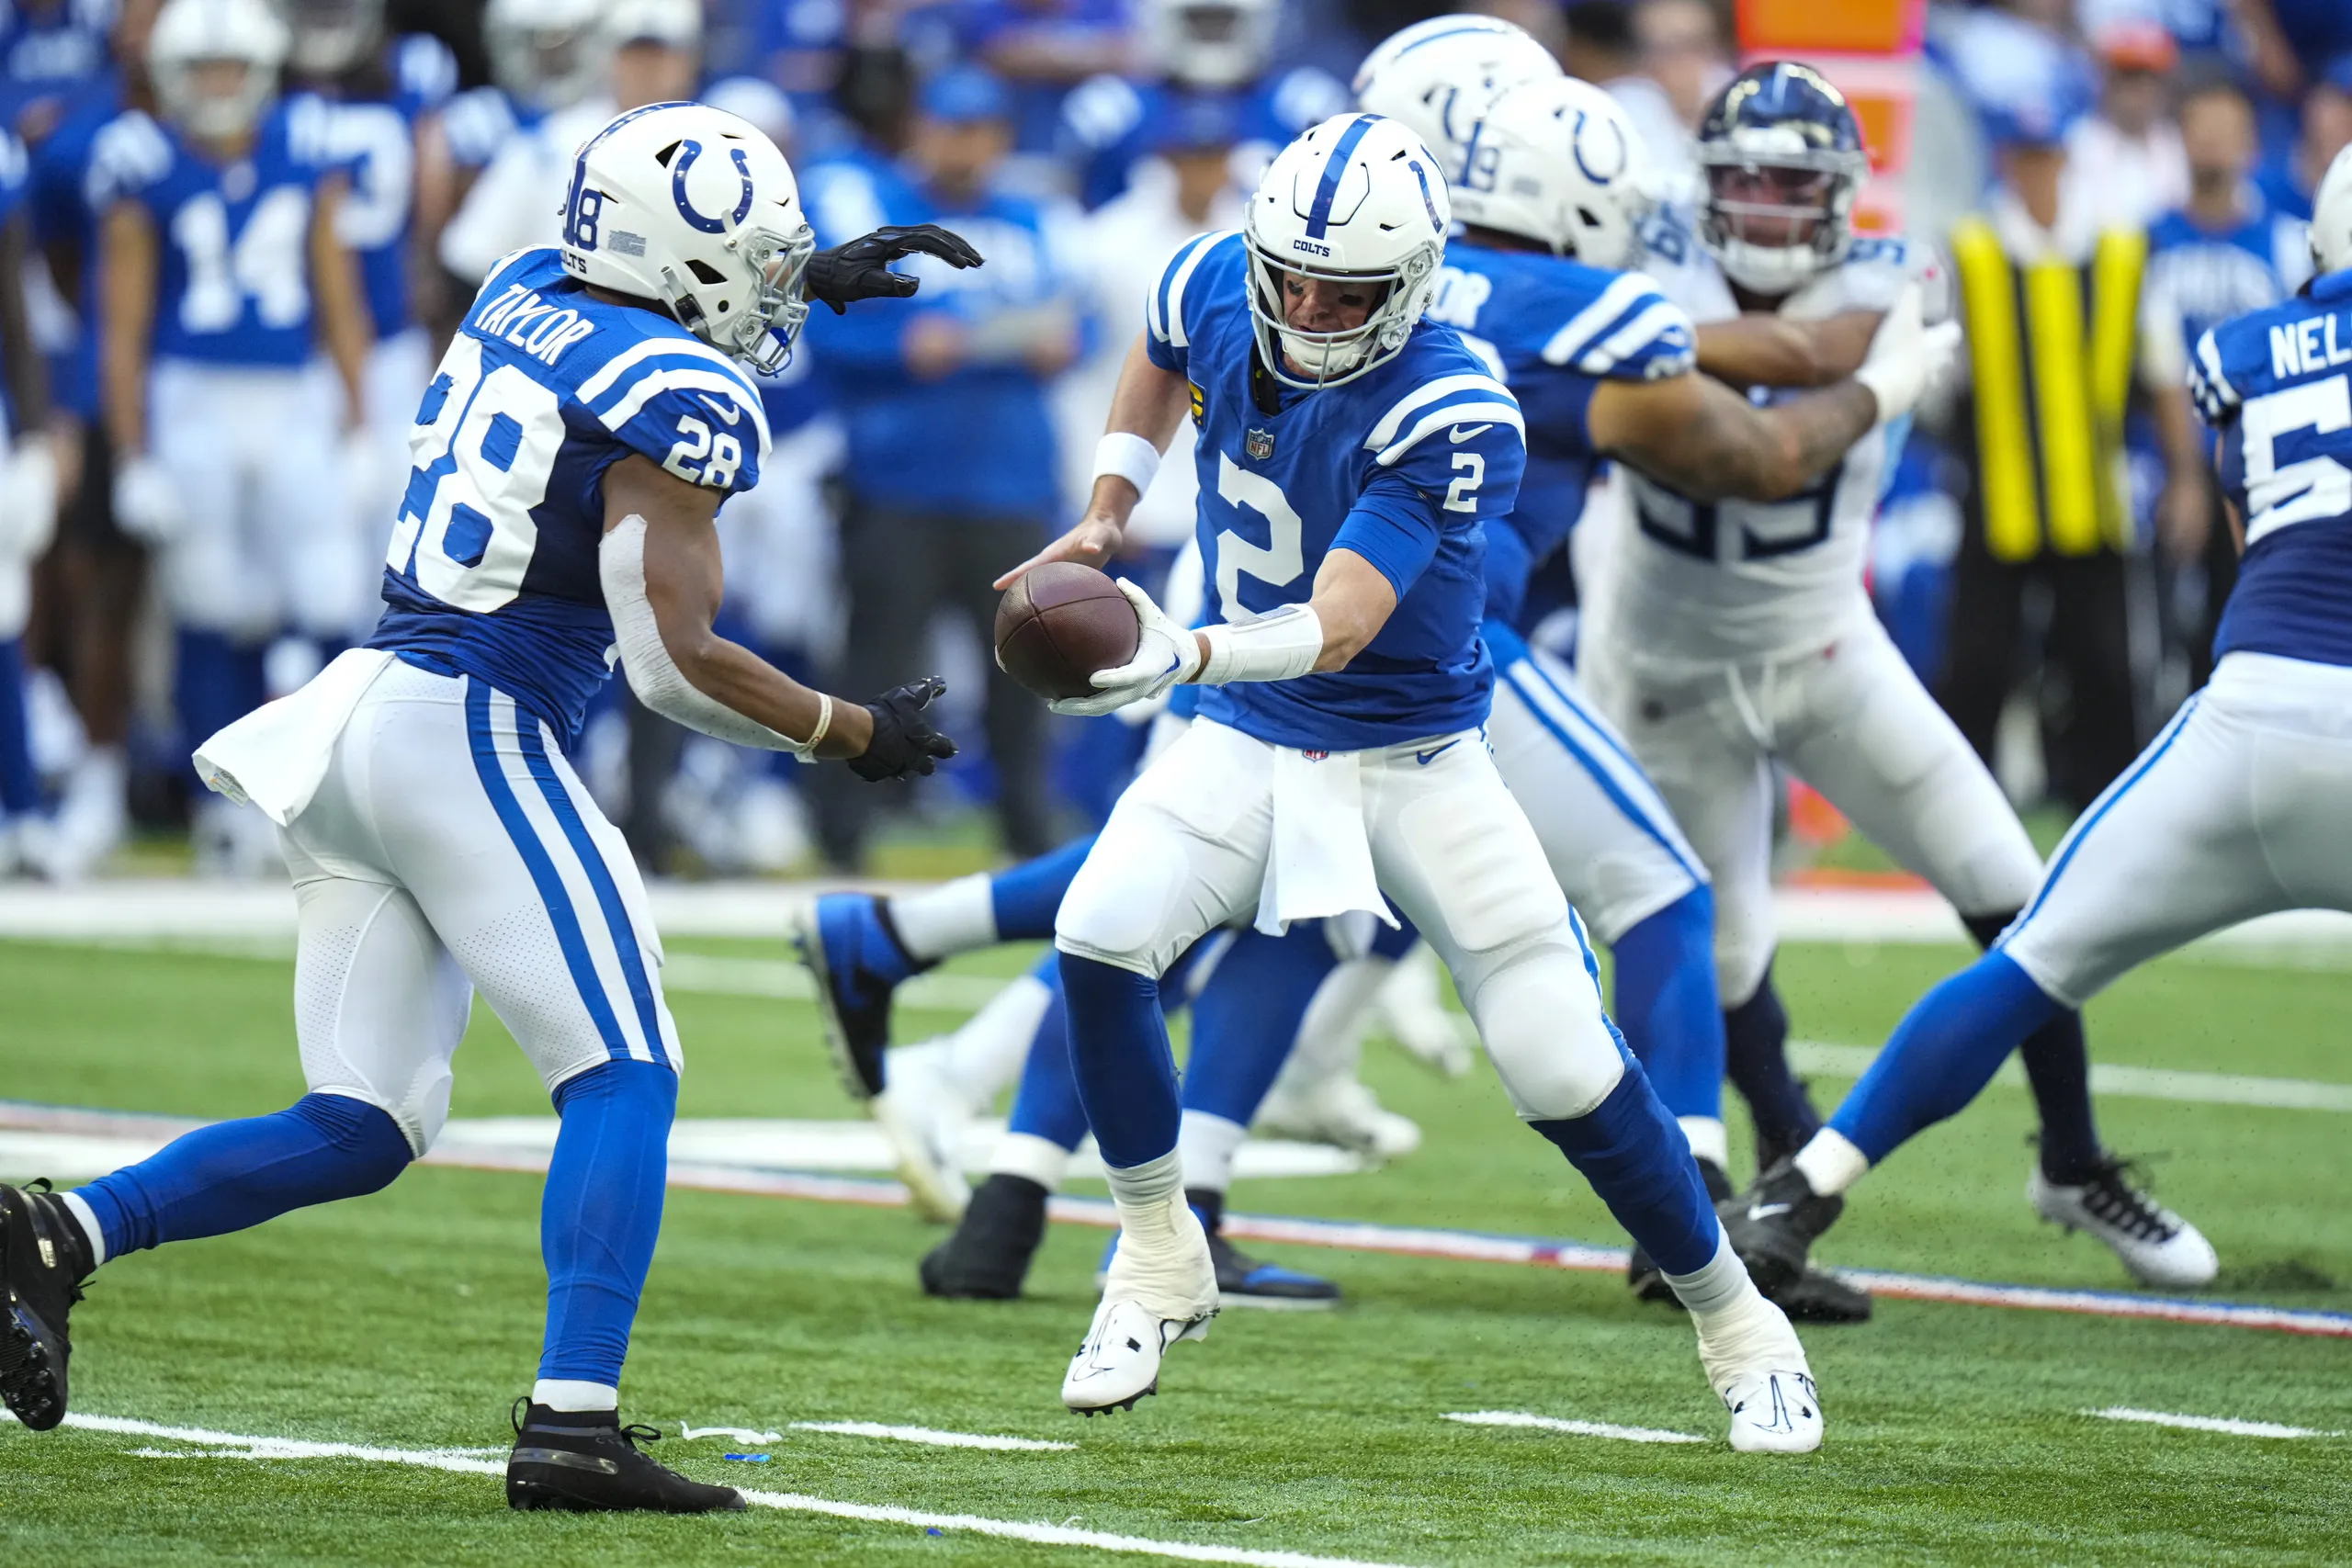 Indianapolis Colts vs. Tennessee Titans: Date, kick-off time